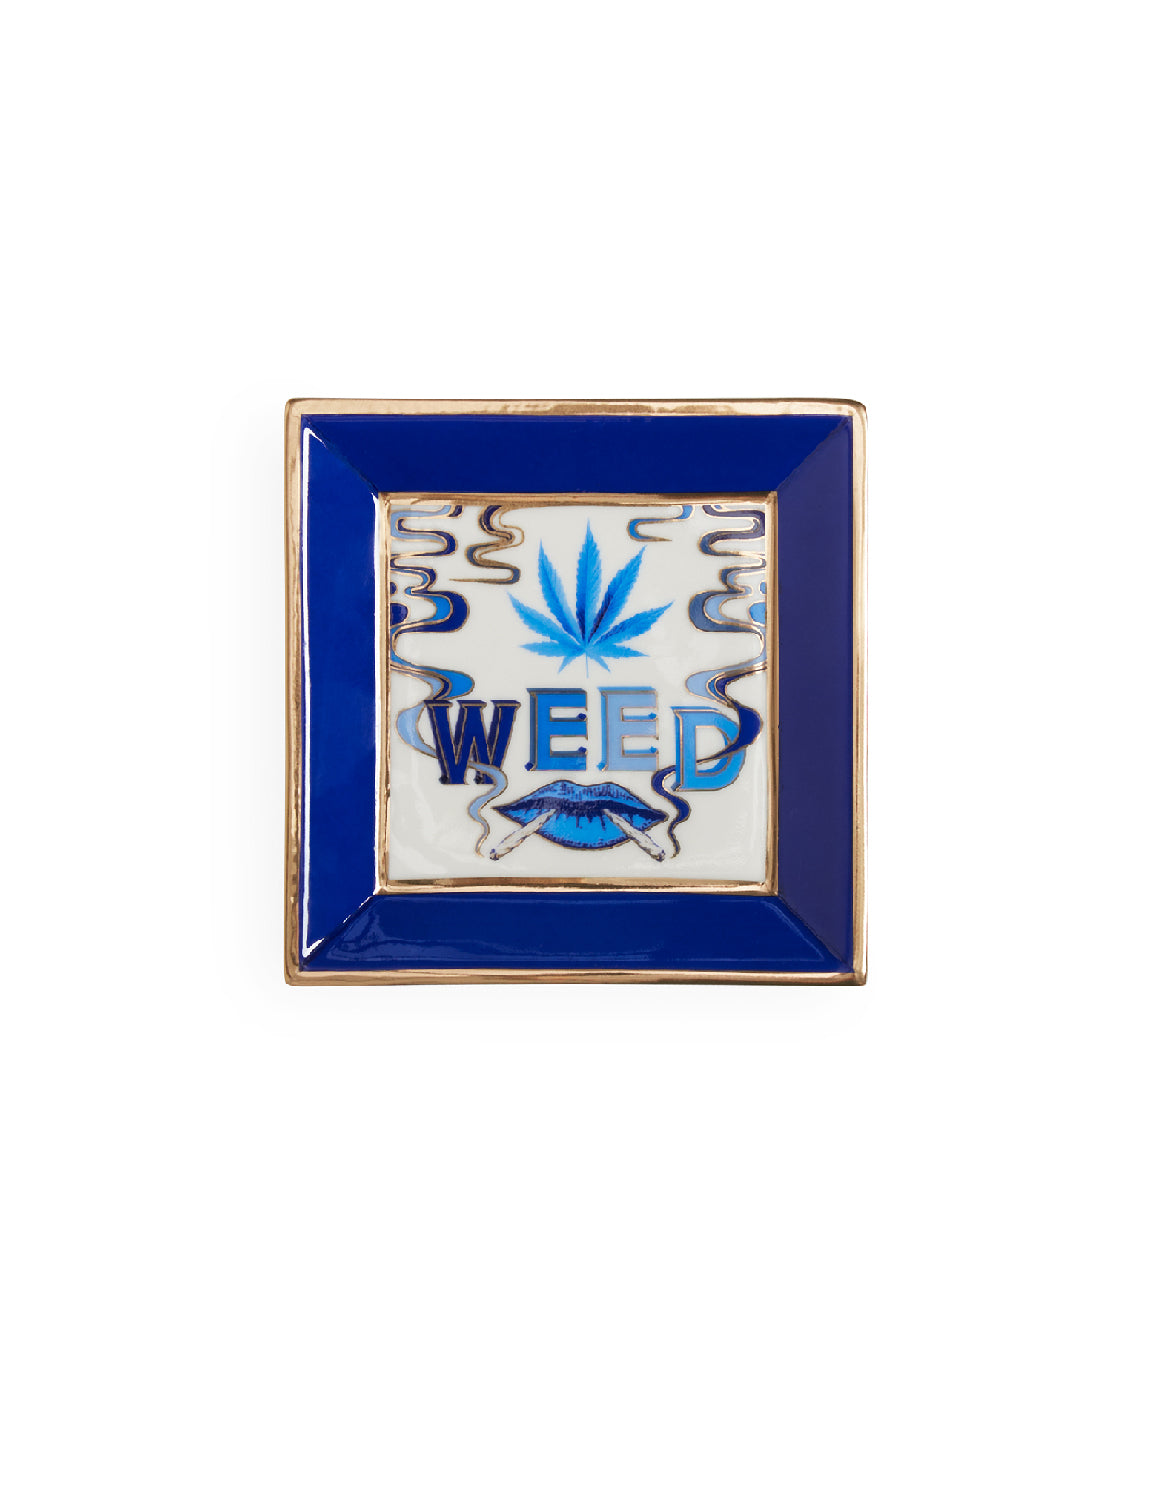 Druggist Weed Square Tray